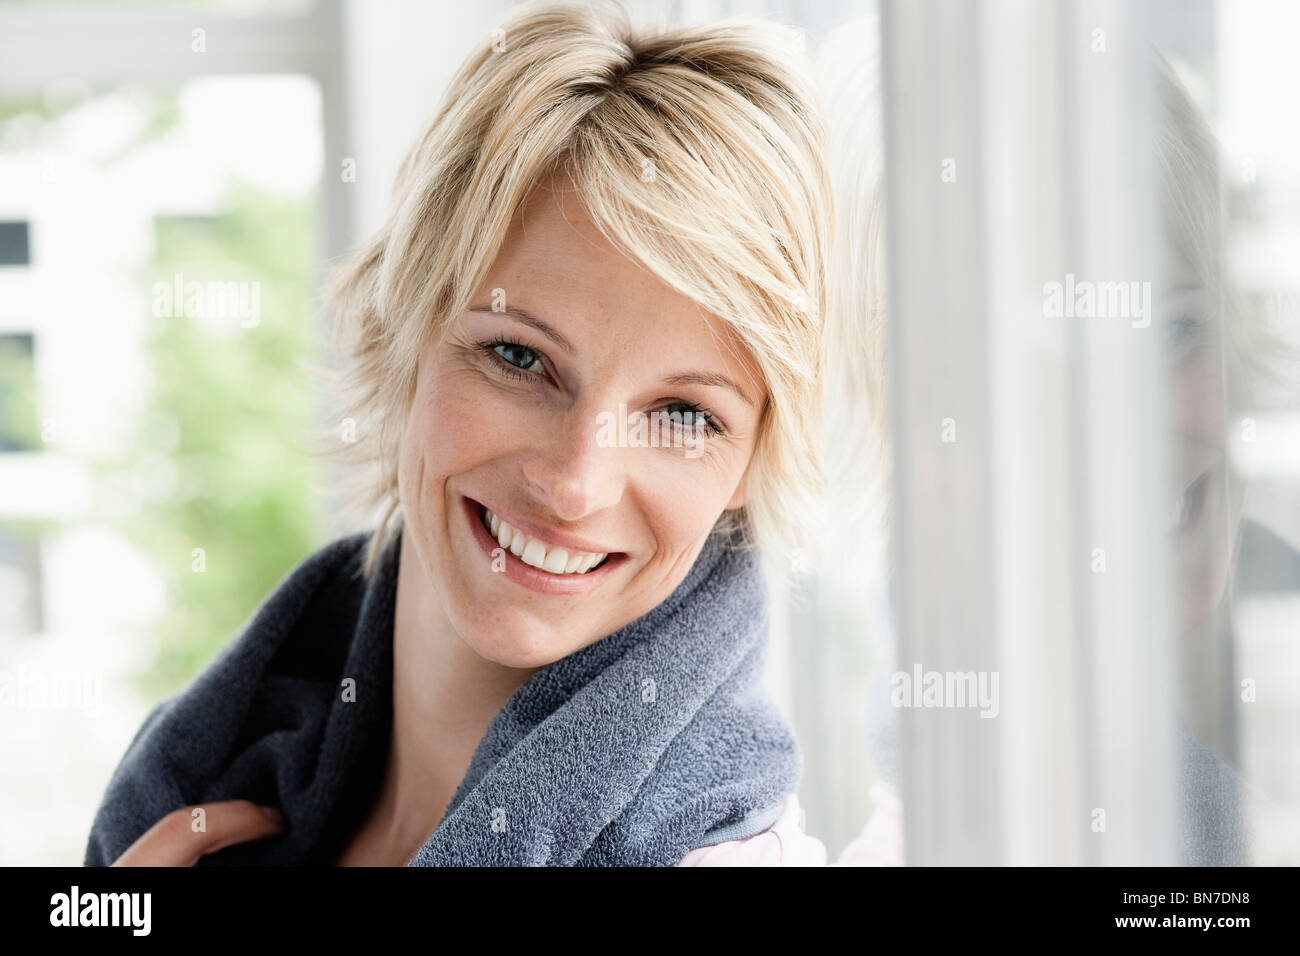 Woman smiling to camera Stock Photo